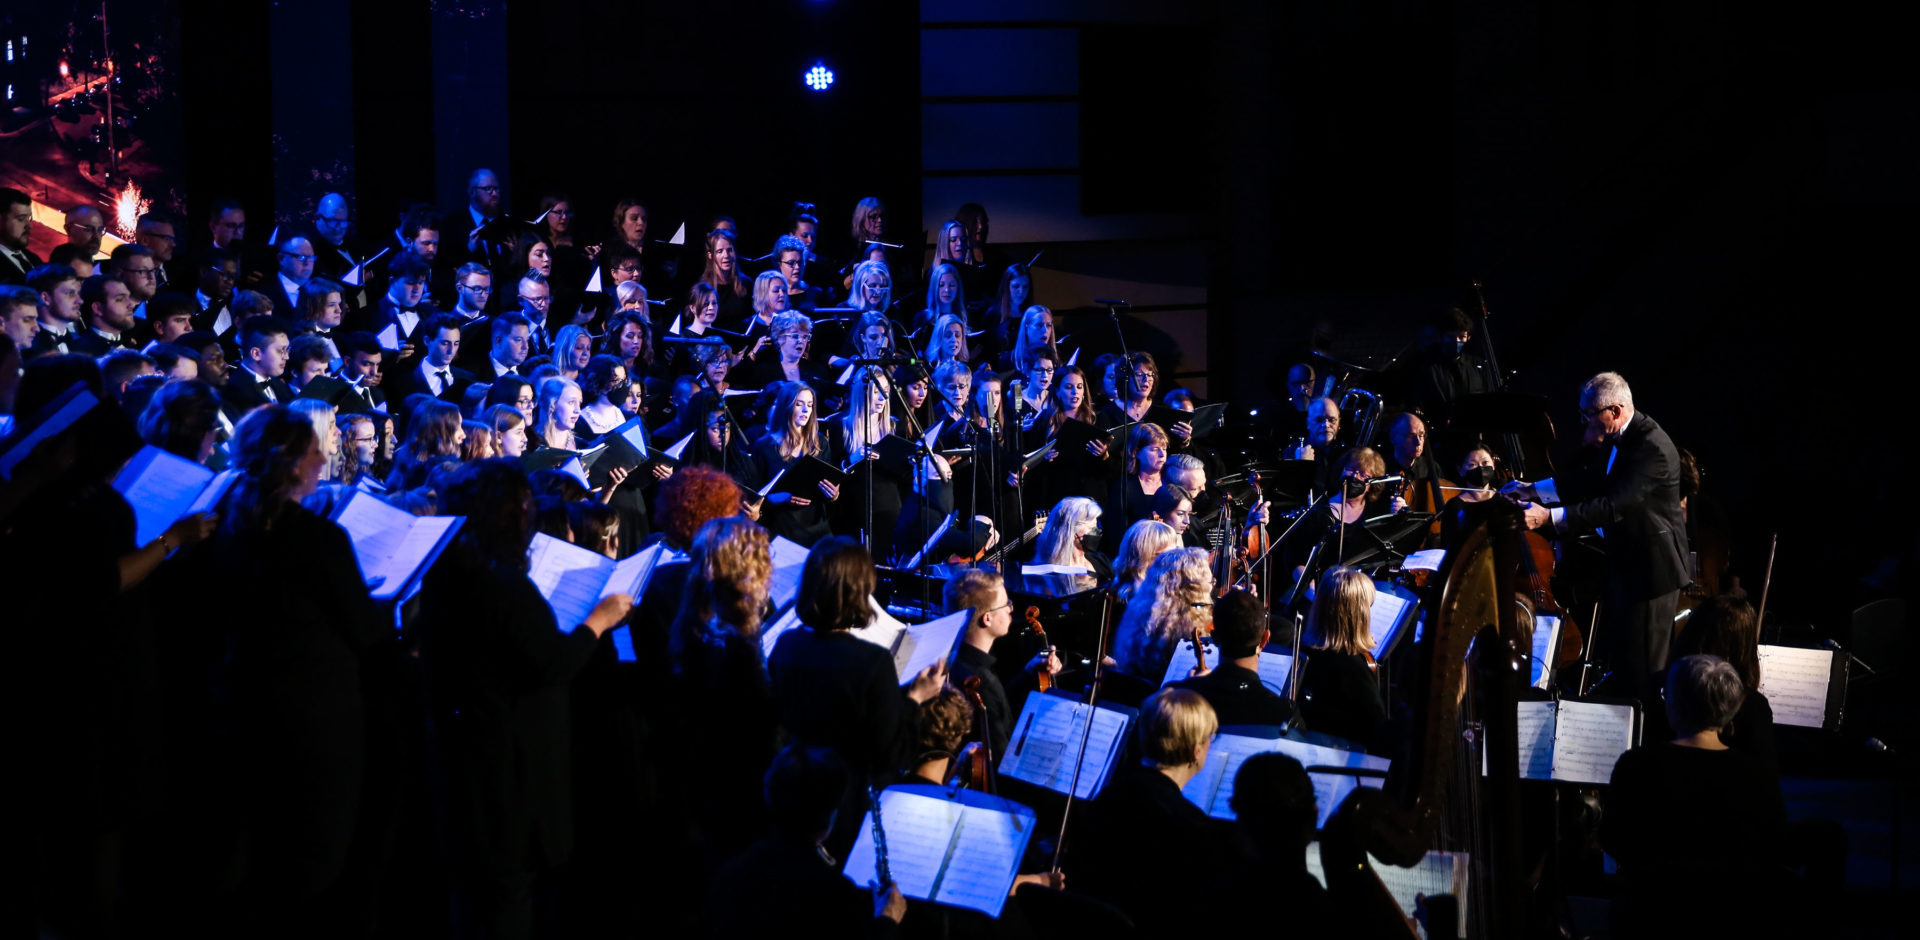 A large concert band performs on-stage during a live performance